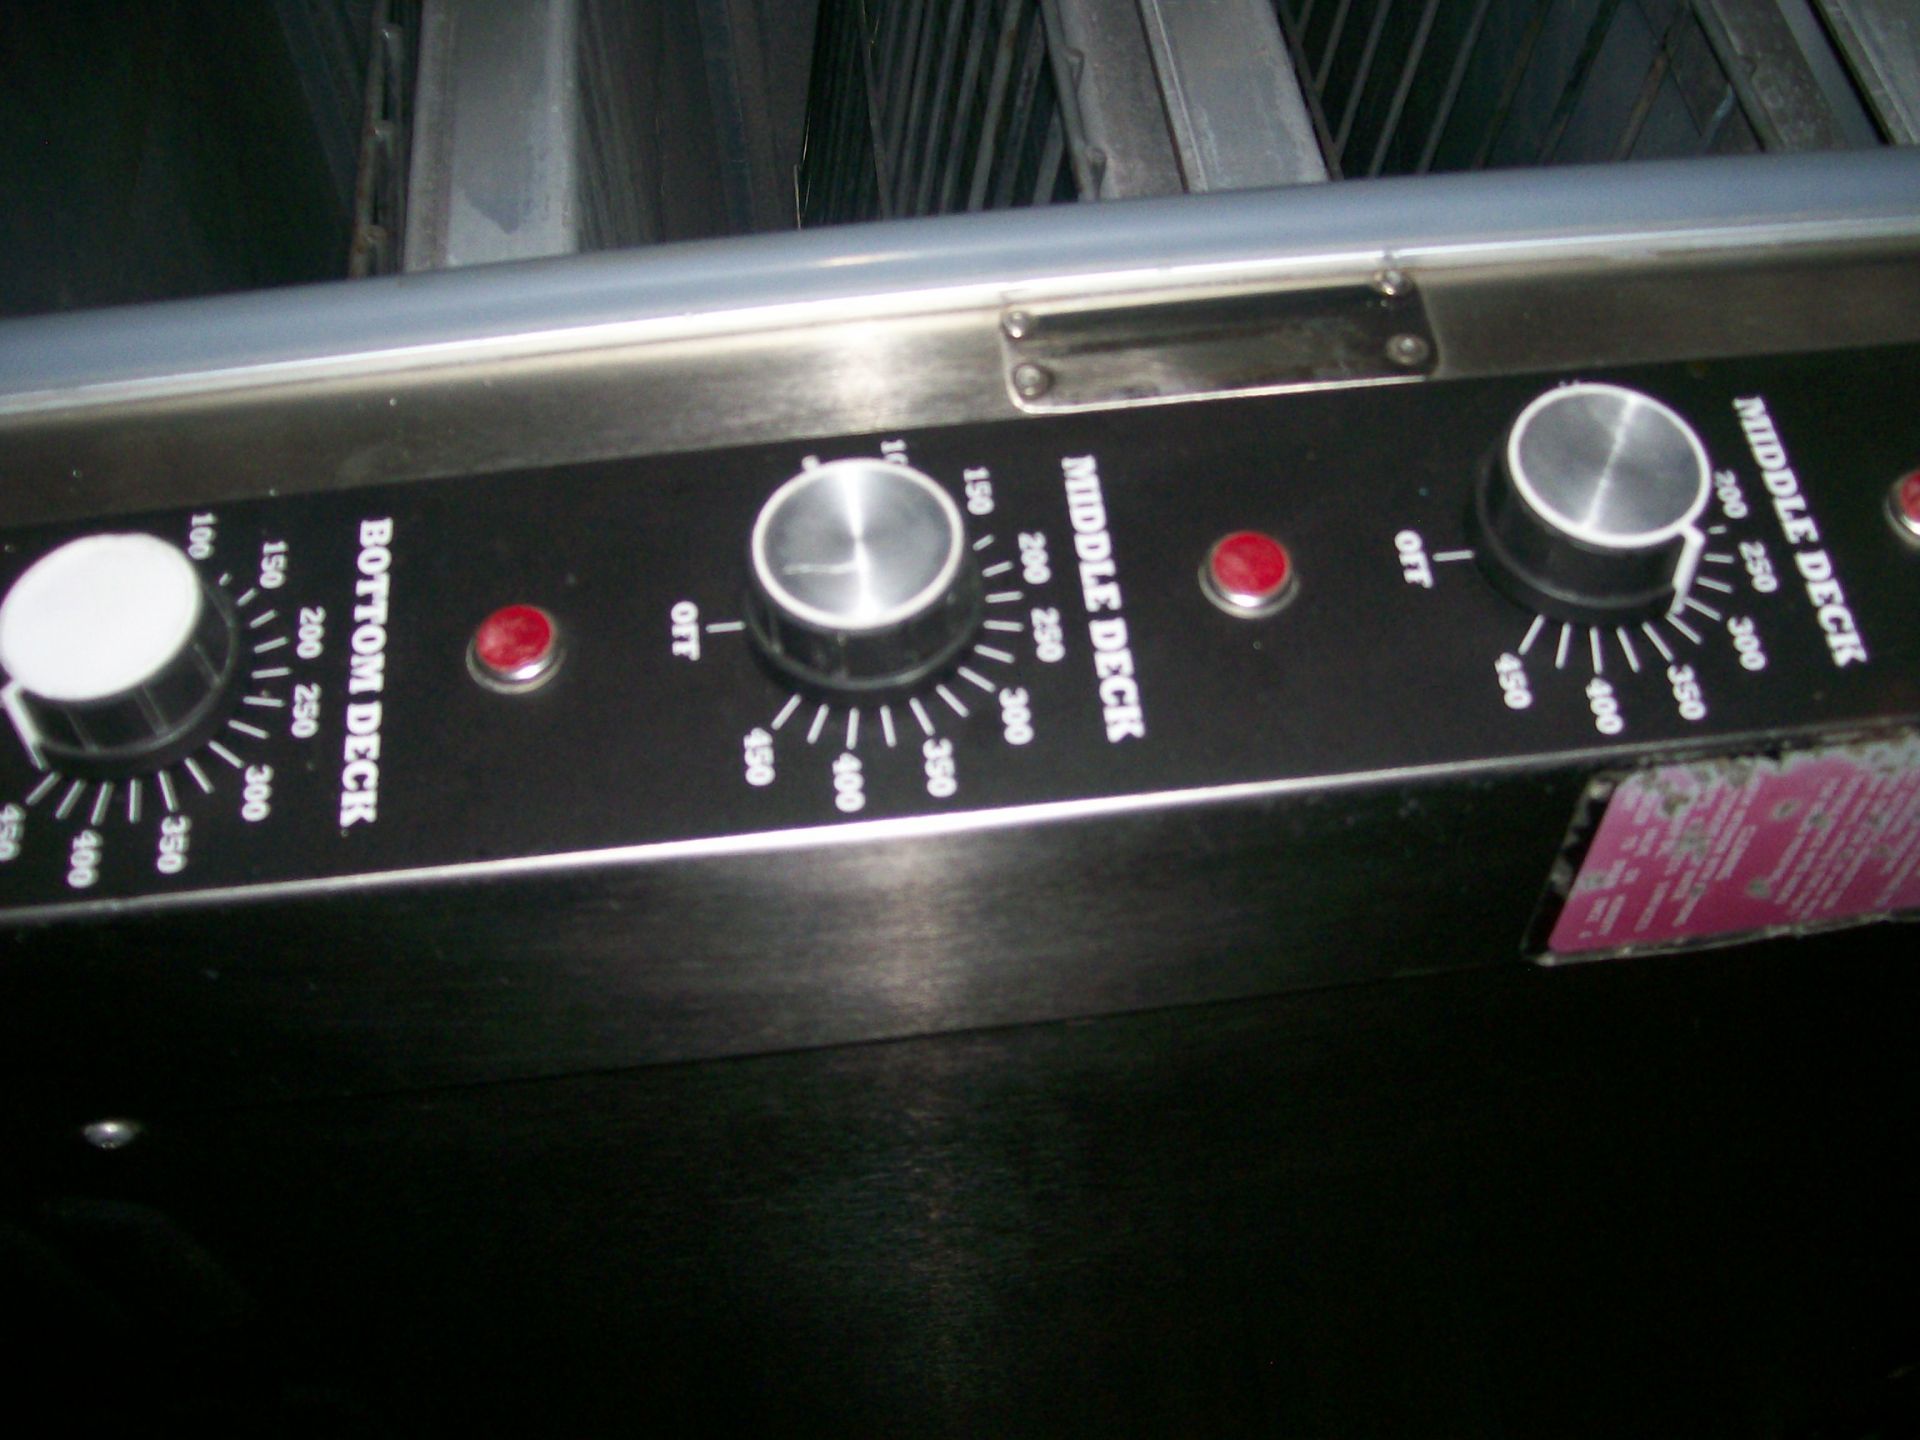 SUPER SYSTEMS PROOFER & OVEN MDL08-4-JJ; SN 11846 W/HUMIDITY; TOPIS OVEN 100-145 DEGREES BOTTOM - Image 5 of 8